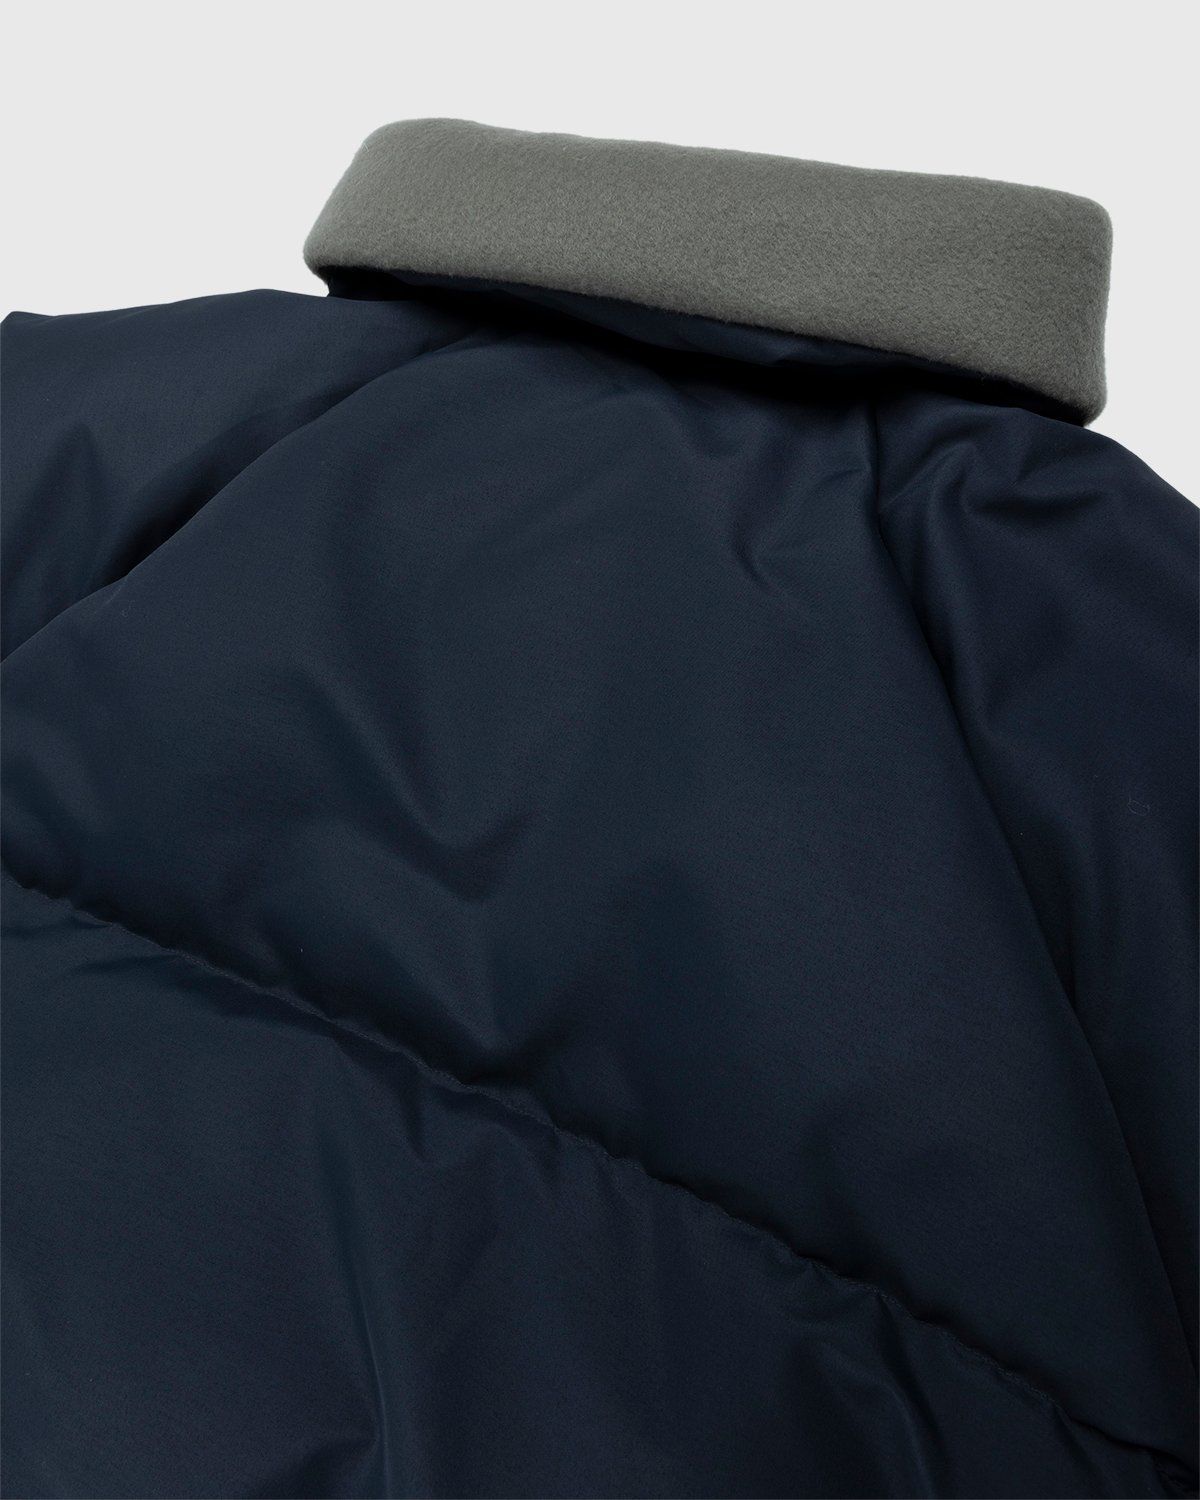 Acne Studios – Down Puffer Jacket Charcoal Grey - Outerwear - Grey - Image 9